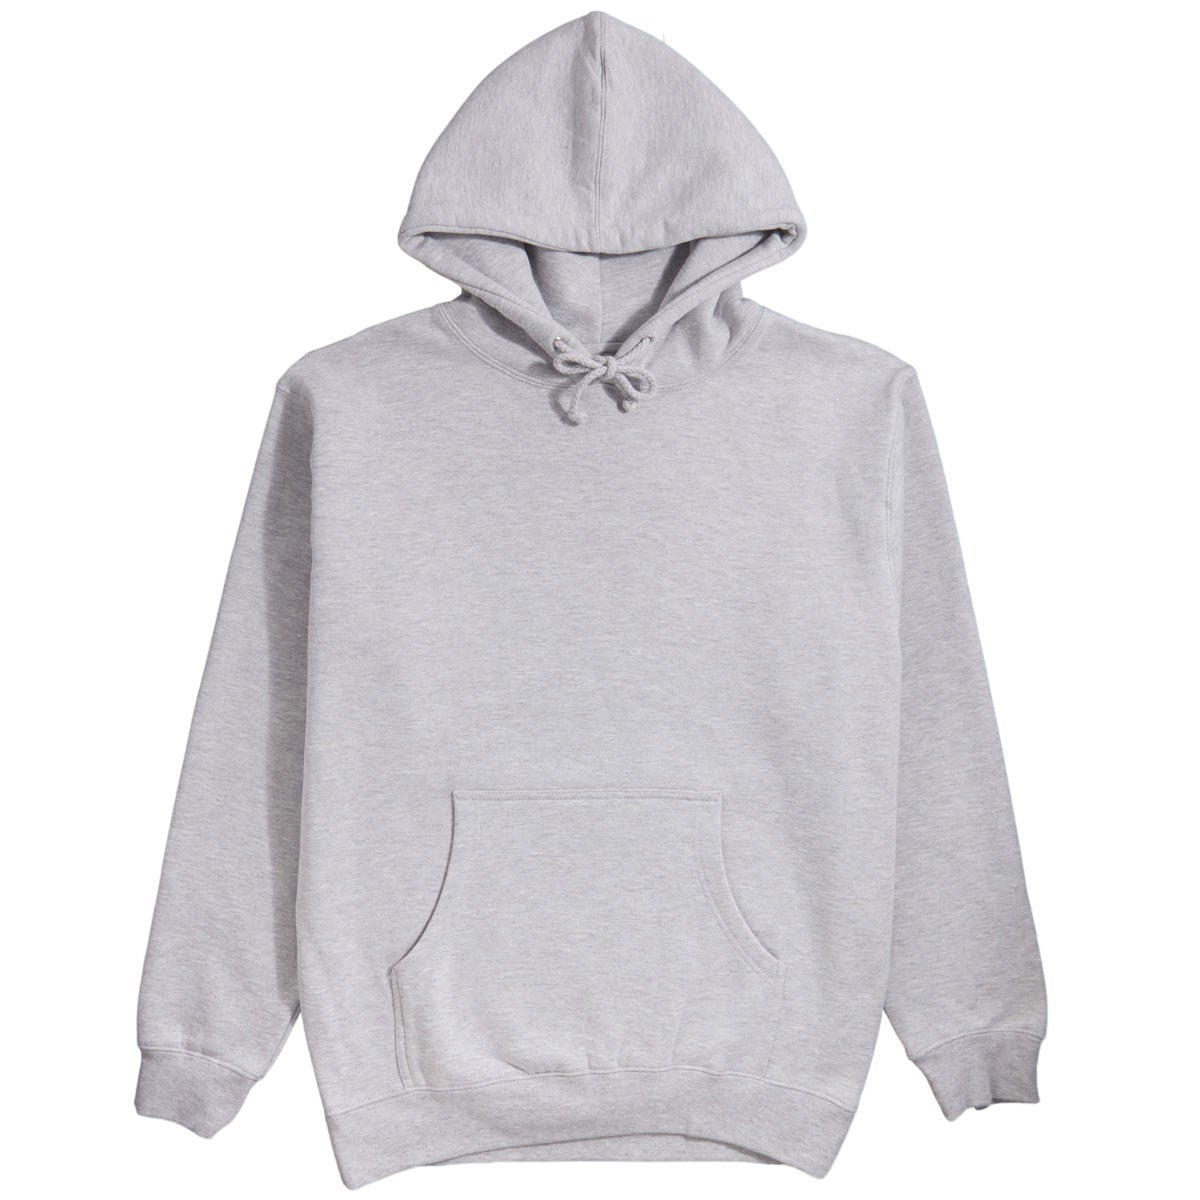 Converse Body Horror Pullover Hoodie image 2